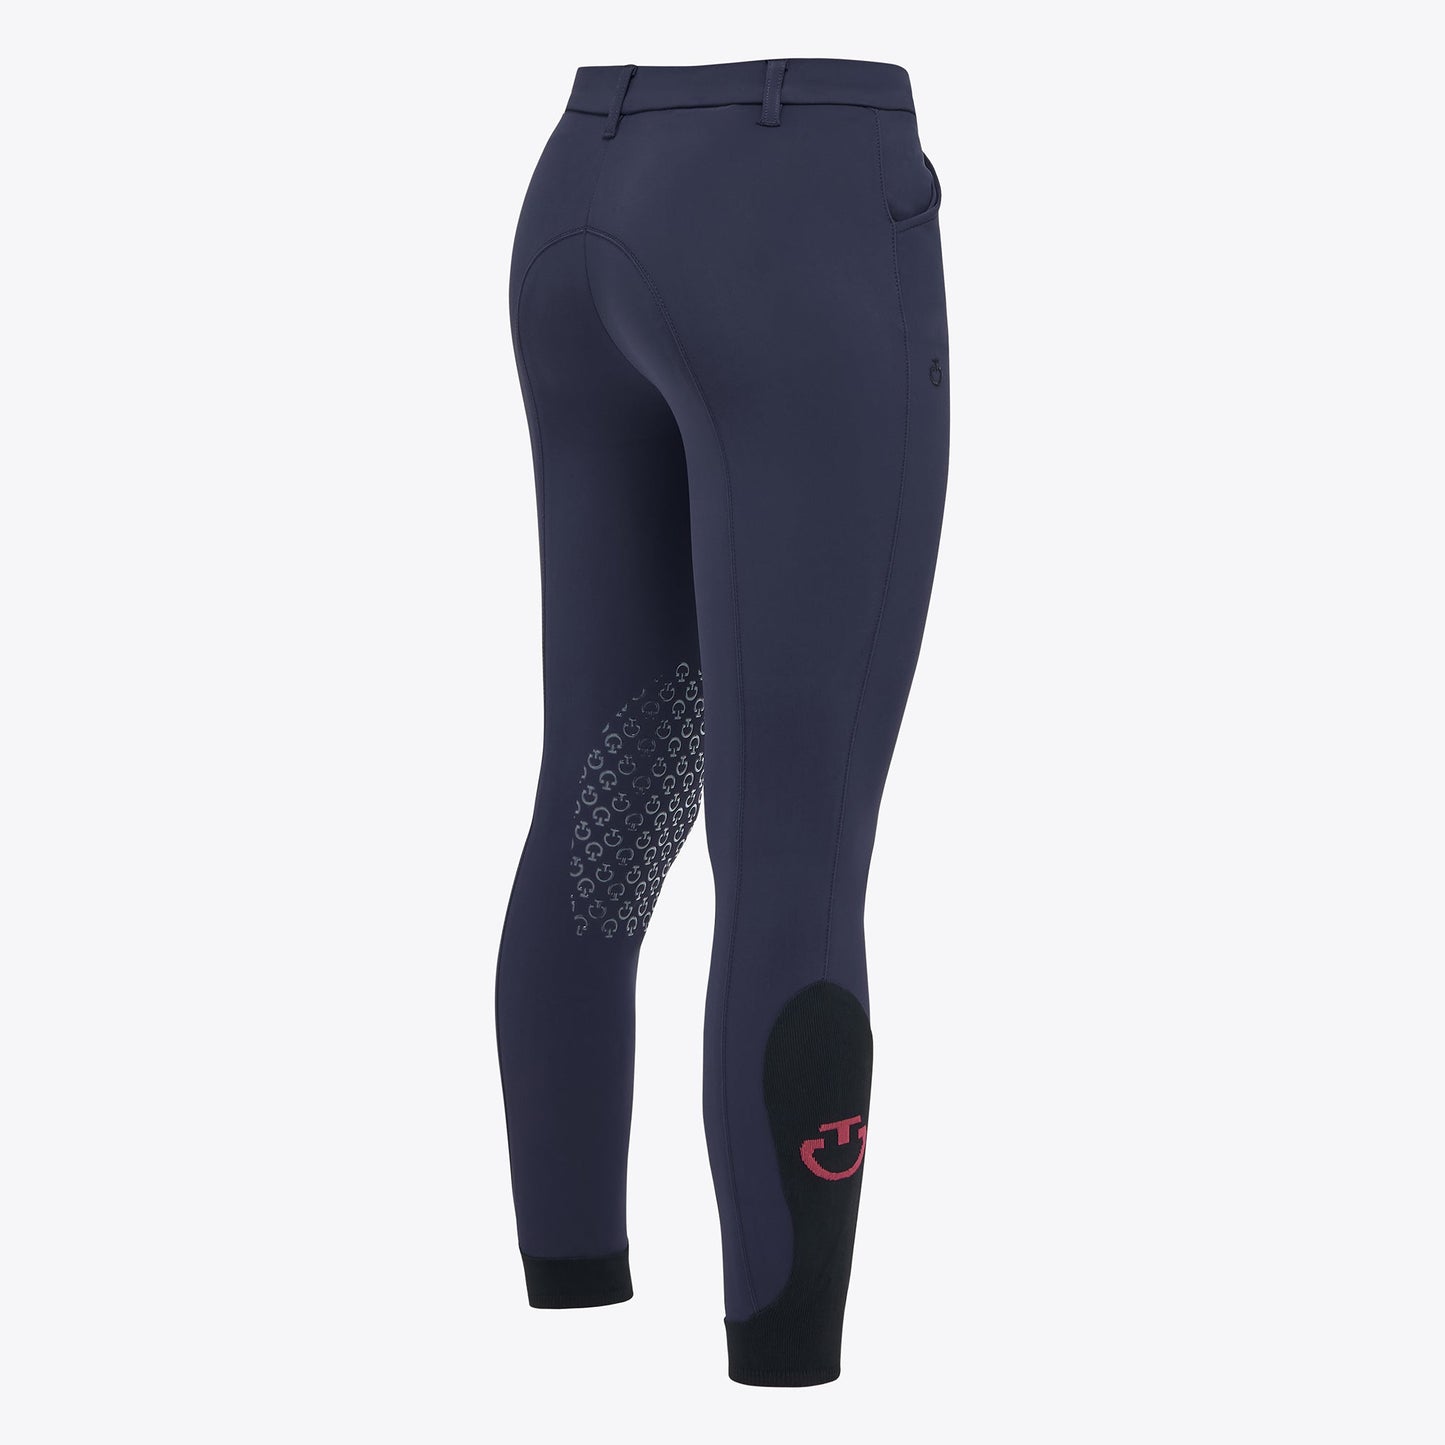 Cavalleria Toscana Young Rider CT logo Grip Breeches-Trailrace Equestrian Outfitters-The Equestrian